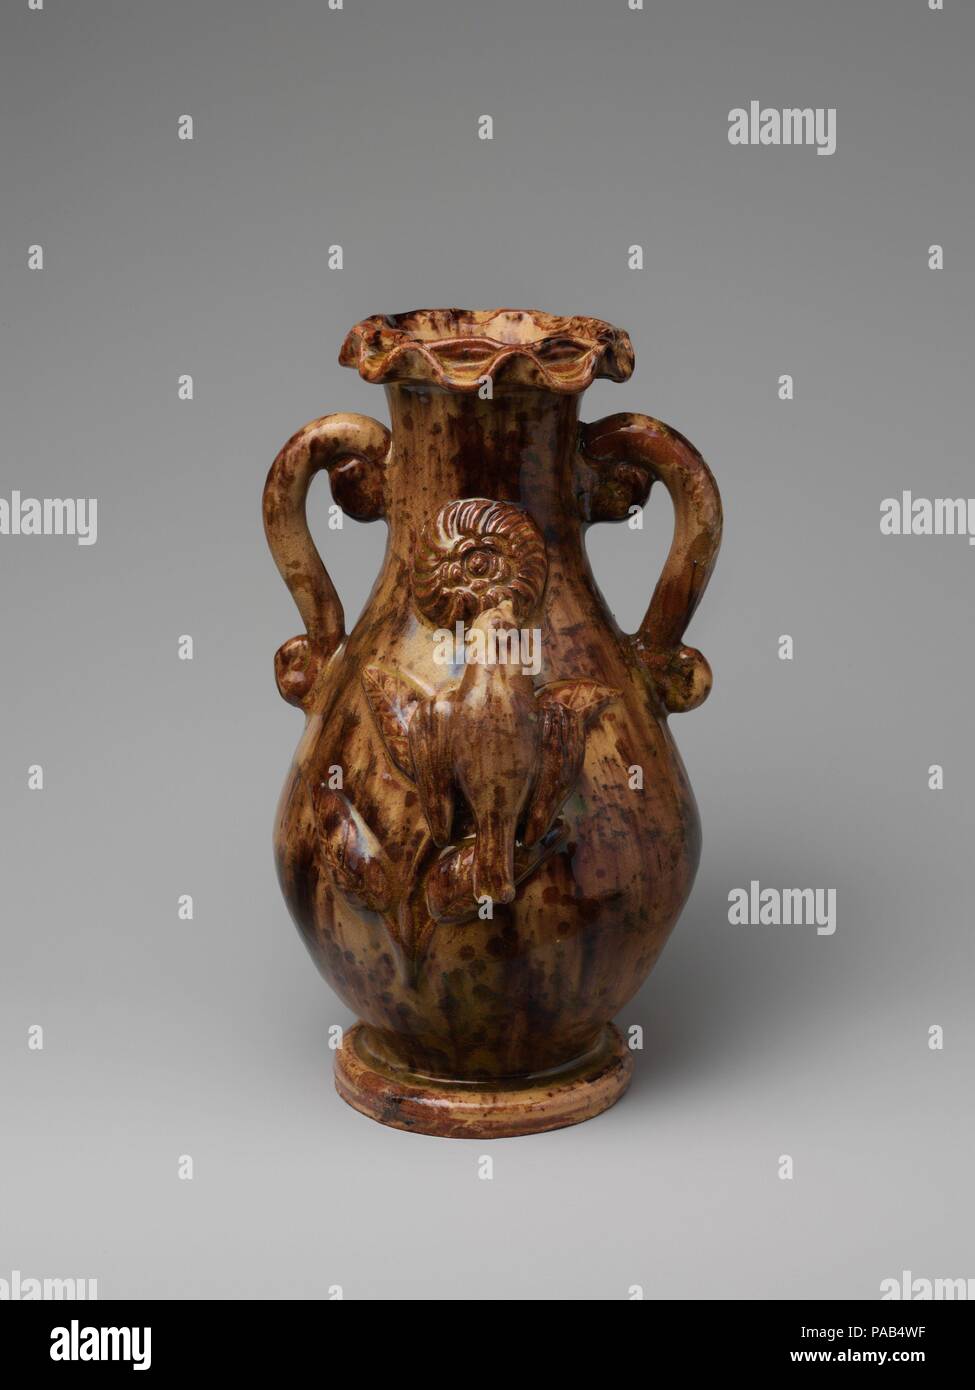 Vase. Culture: American. Dimensions: H. 9 1/2 in. (24.1 cm). Maker: Anthony W. Baecher (1824-1889). Date: 1880-89.  A German immigrant considered one of the most accomplished of the Shenandoah Valley potters, Baecher produced this vase in a primitive Rococo-style scheme. Although he repeatedly employed lowrelief pinwheel flowers and sculptural feeding birds as decoration on his hollow ware, archaeological findings reveal that simple storage jars were the mainstay of his production. Museum: Metropolitan Museum of Art, New York, USA. Stock Photo